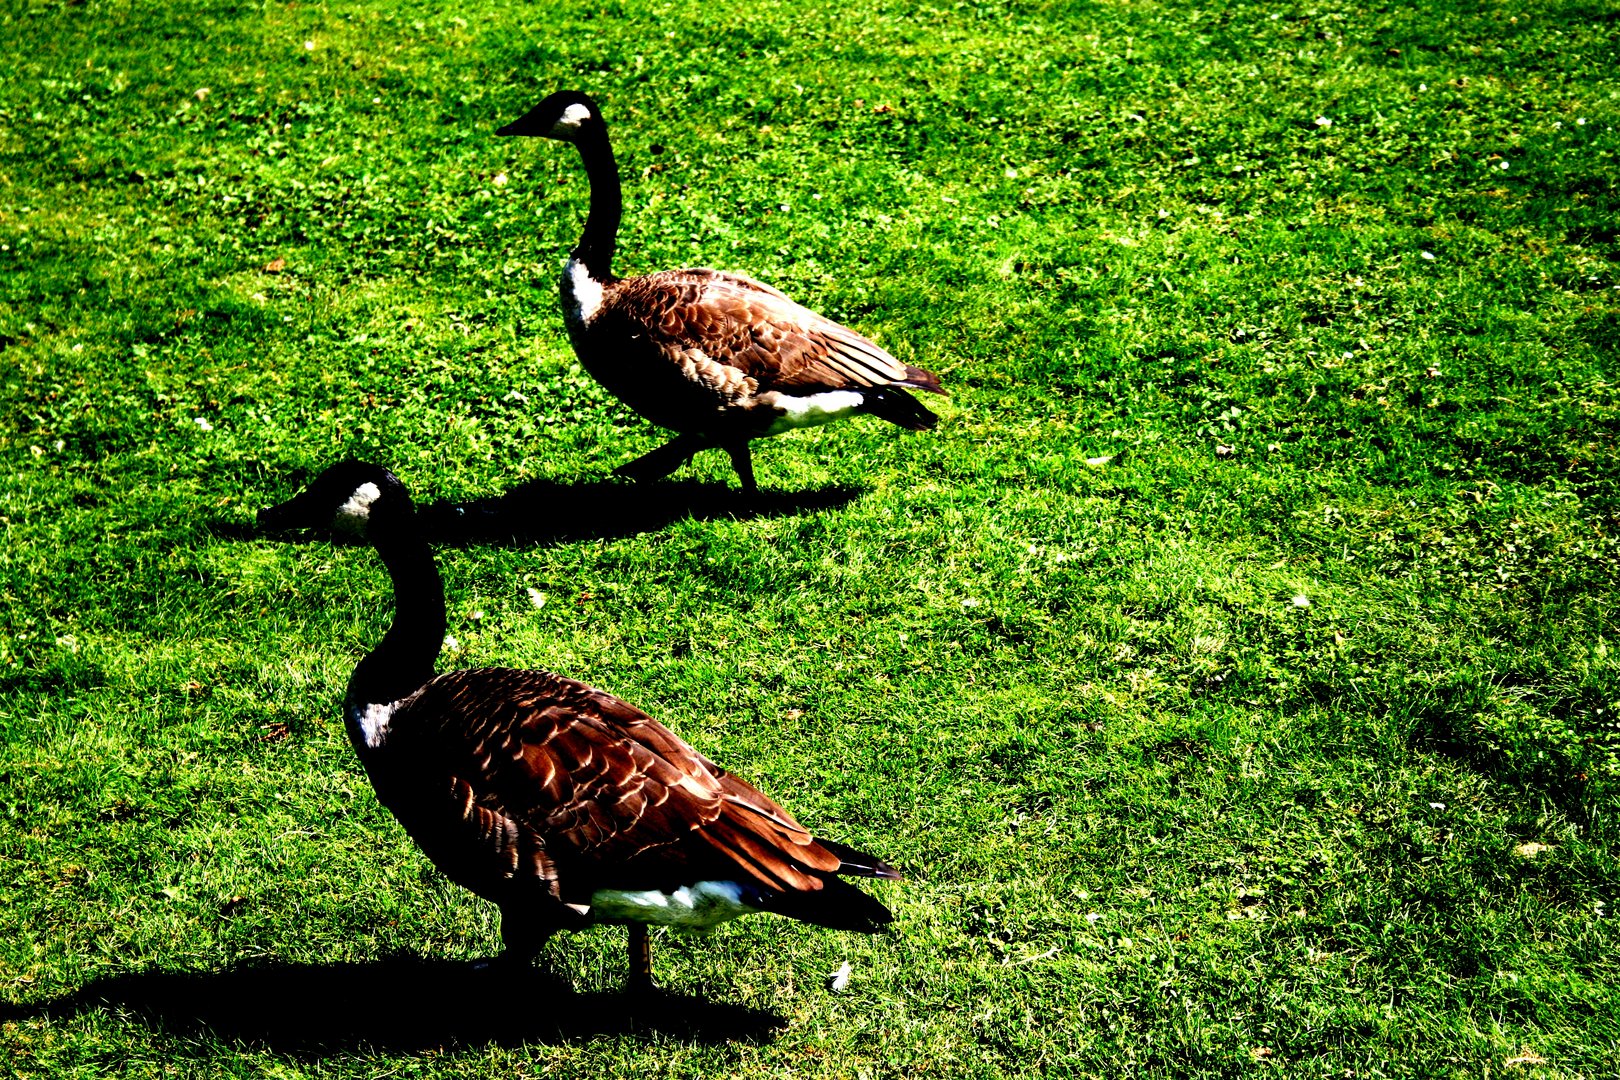 These geese are made for walking...